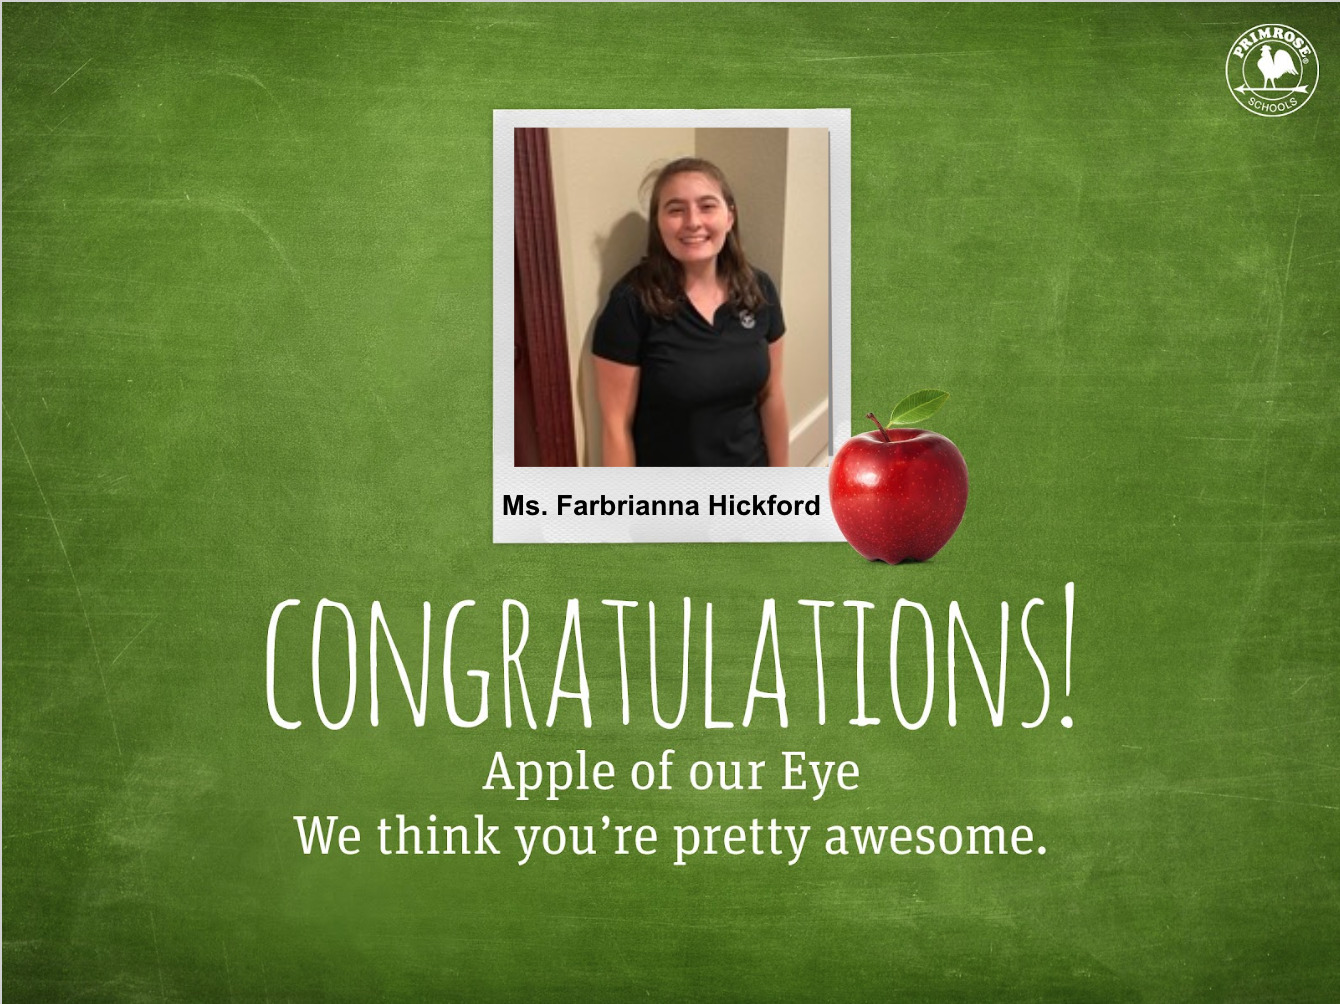 Congratulations to Ms. Hickford for being August's recipient of Apple of our Eye!